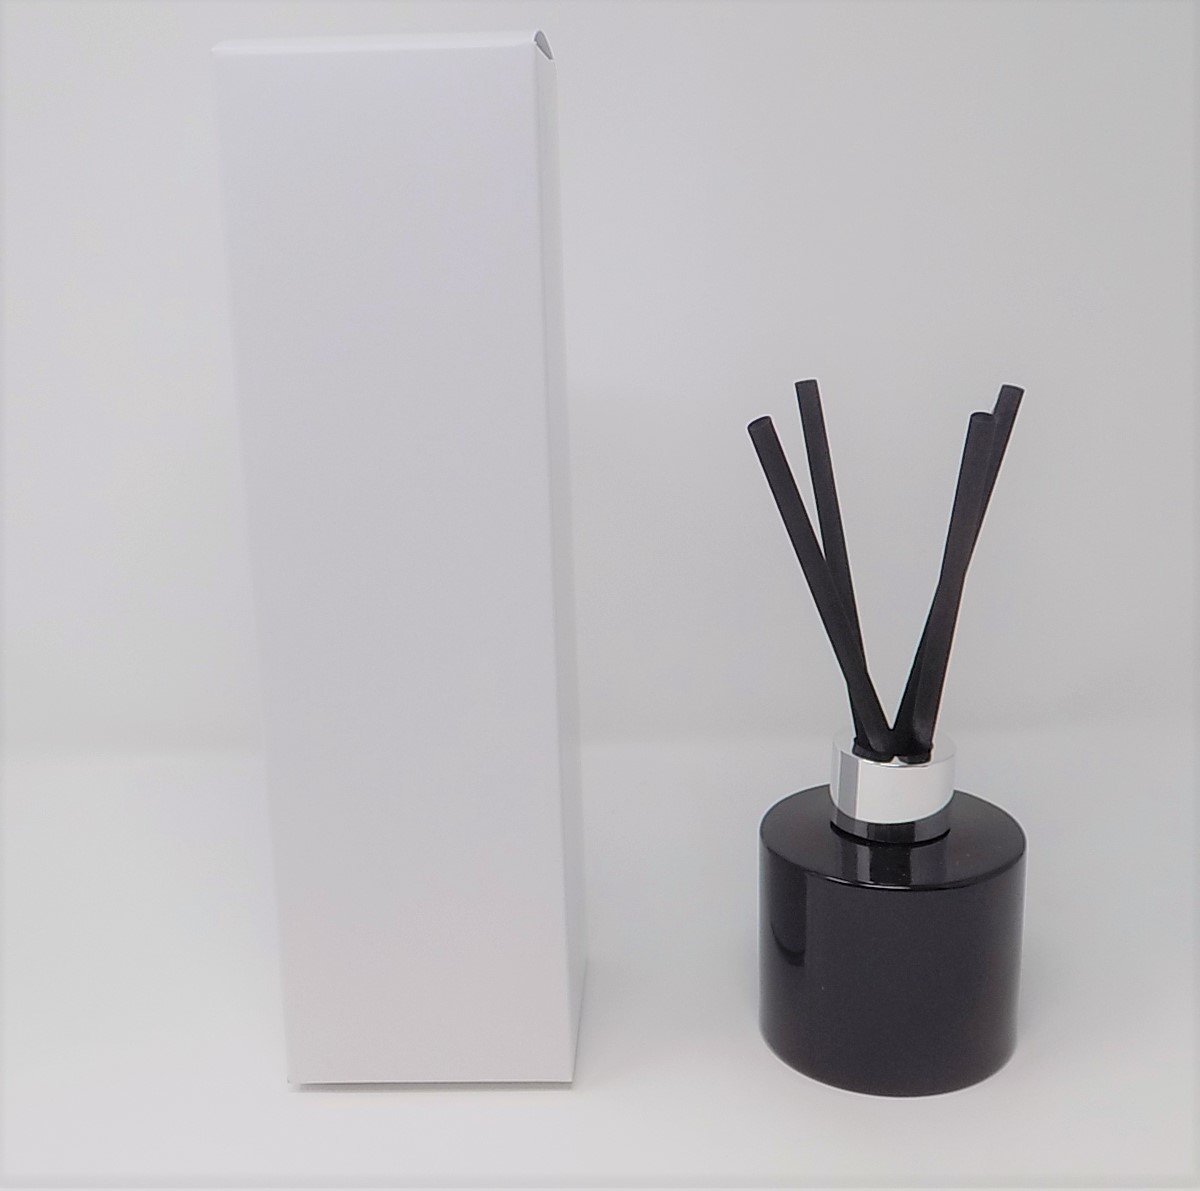 200ml DIFFUSER BOX tall  - WHITE (Pack of 10)